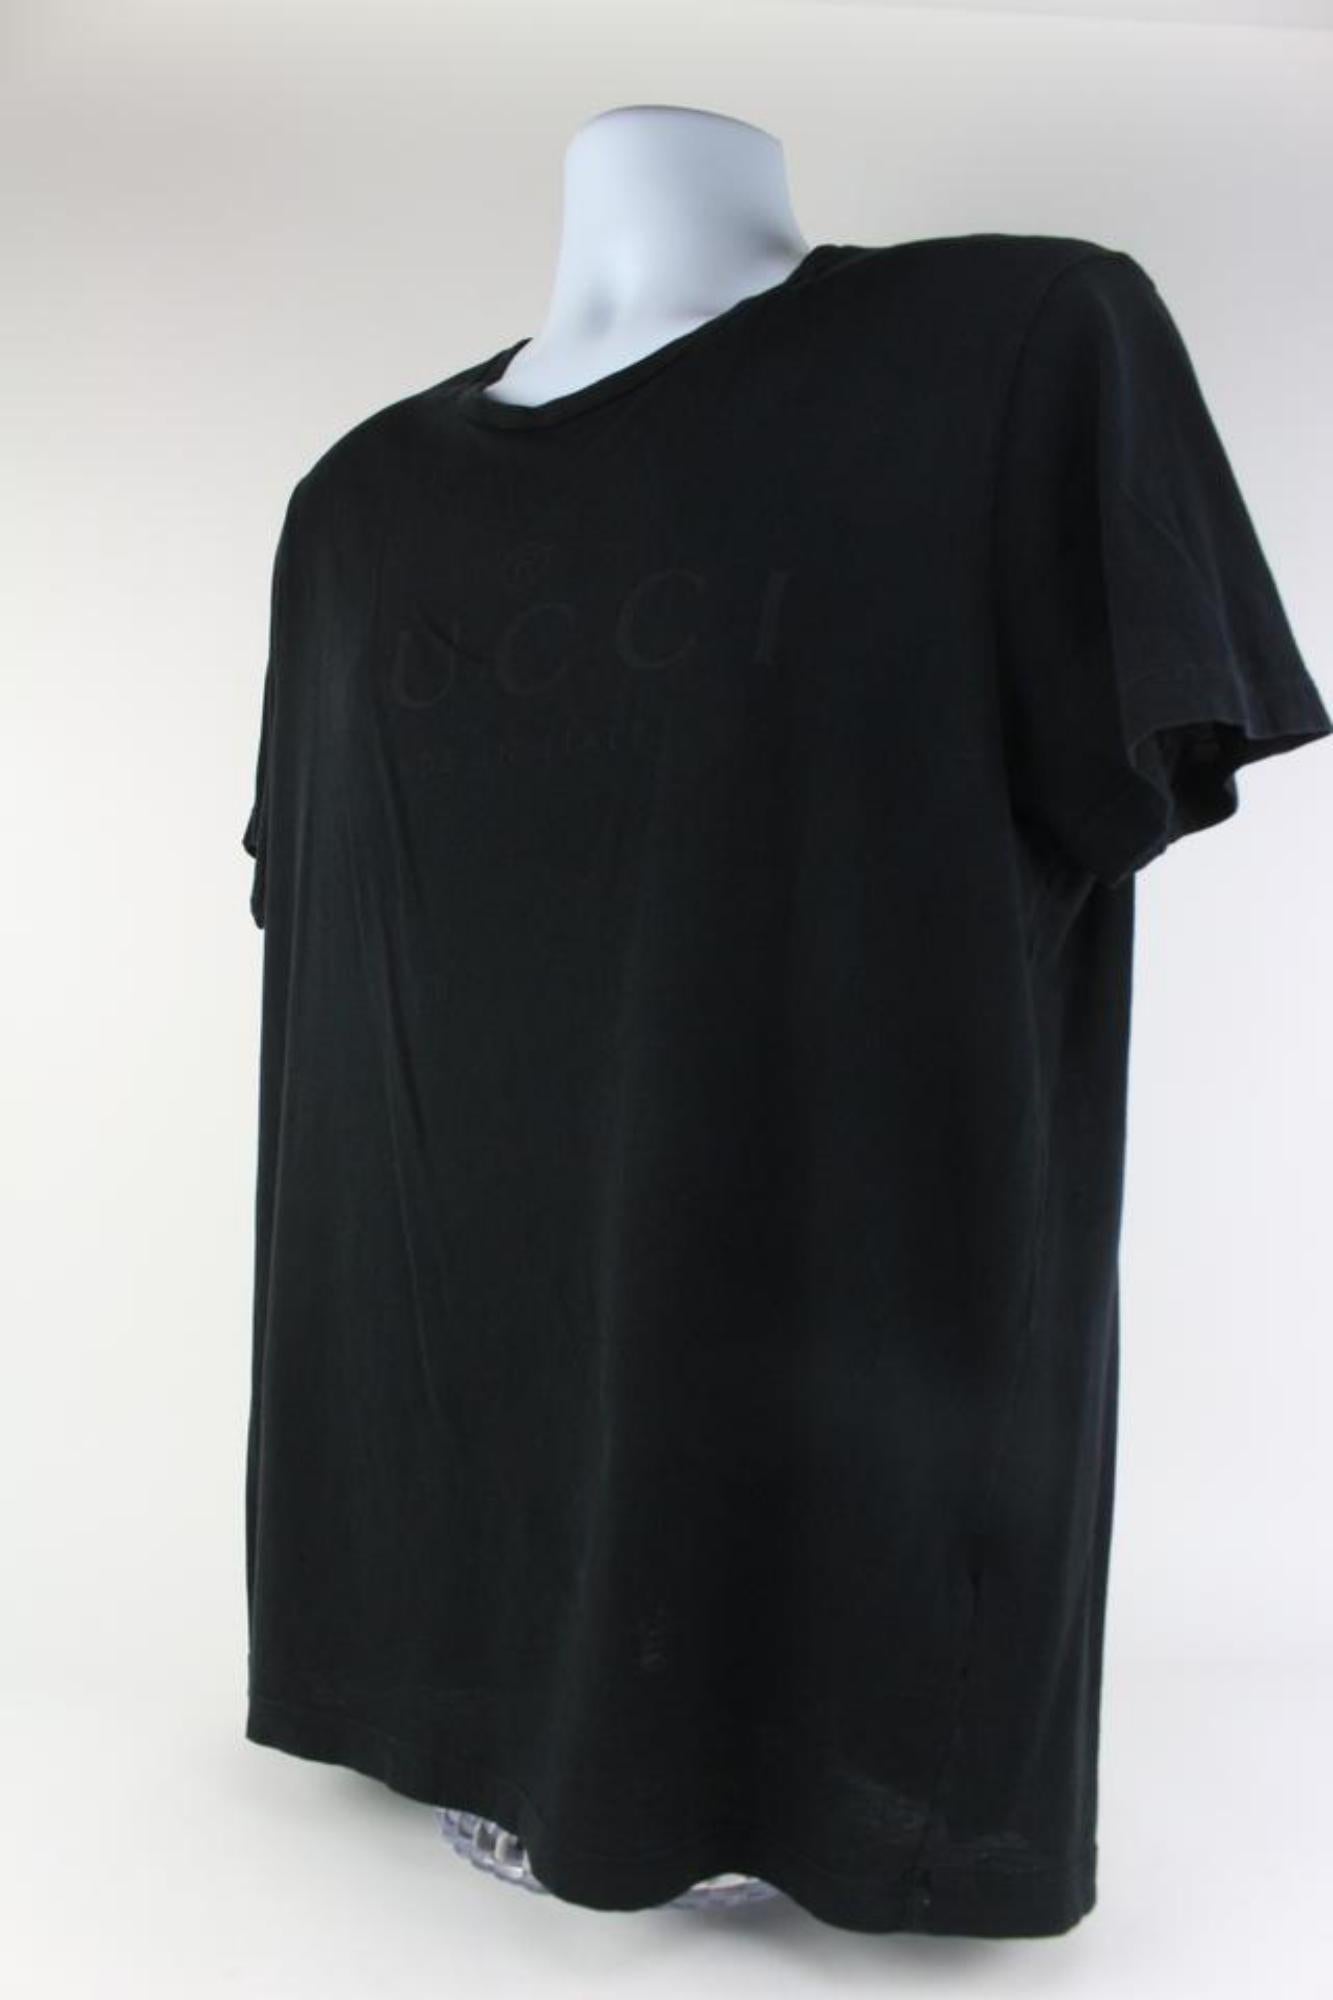 Gucci Black Trademark Logo Classic T-Shirt 1116g38
Made In: Italy
Measurements: Length:  21.5